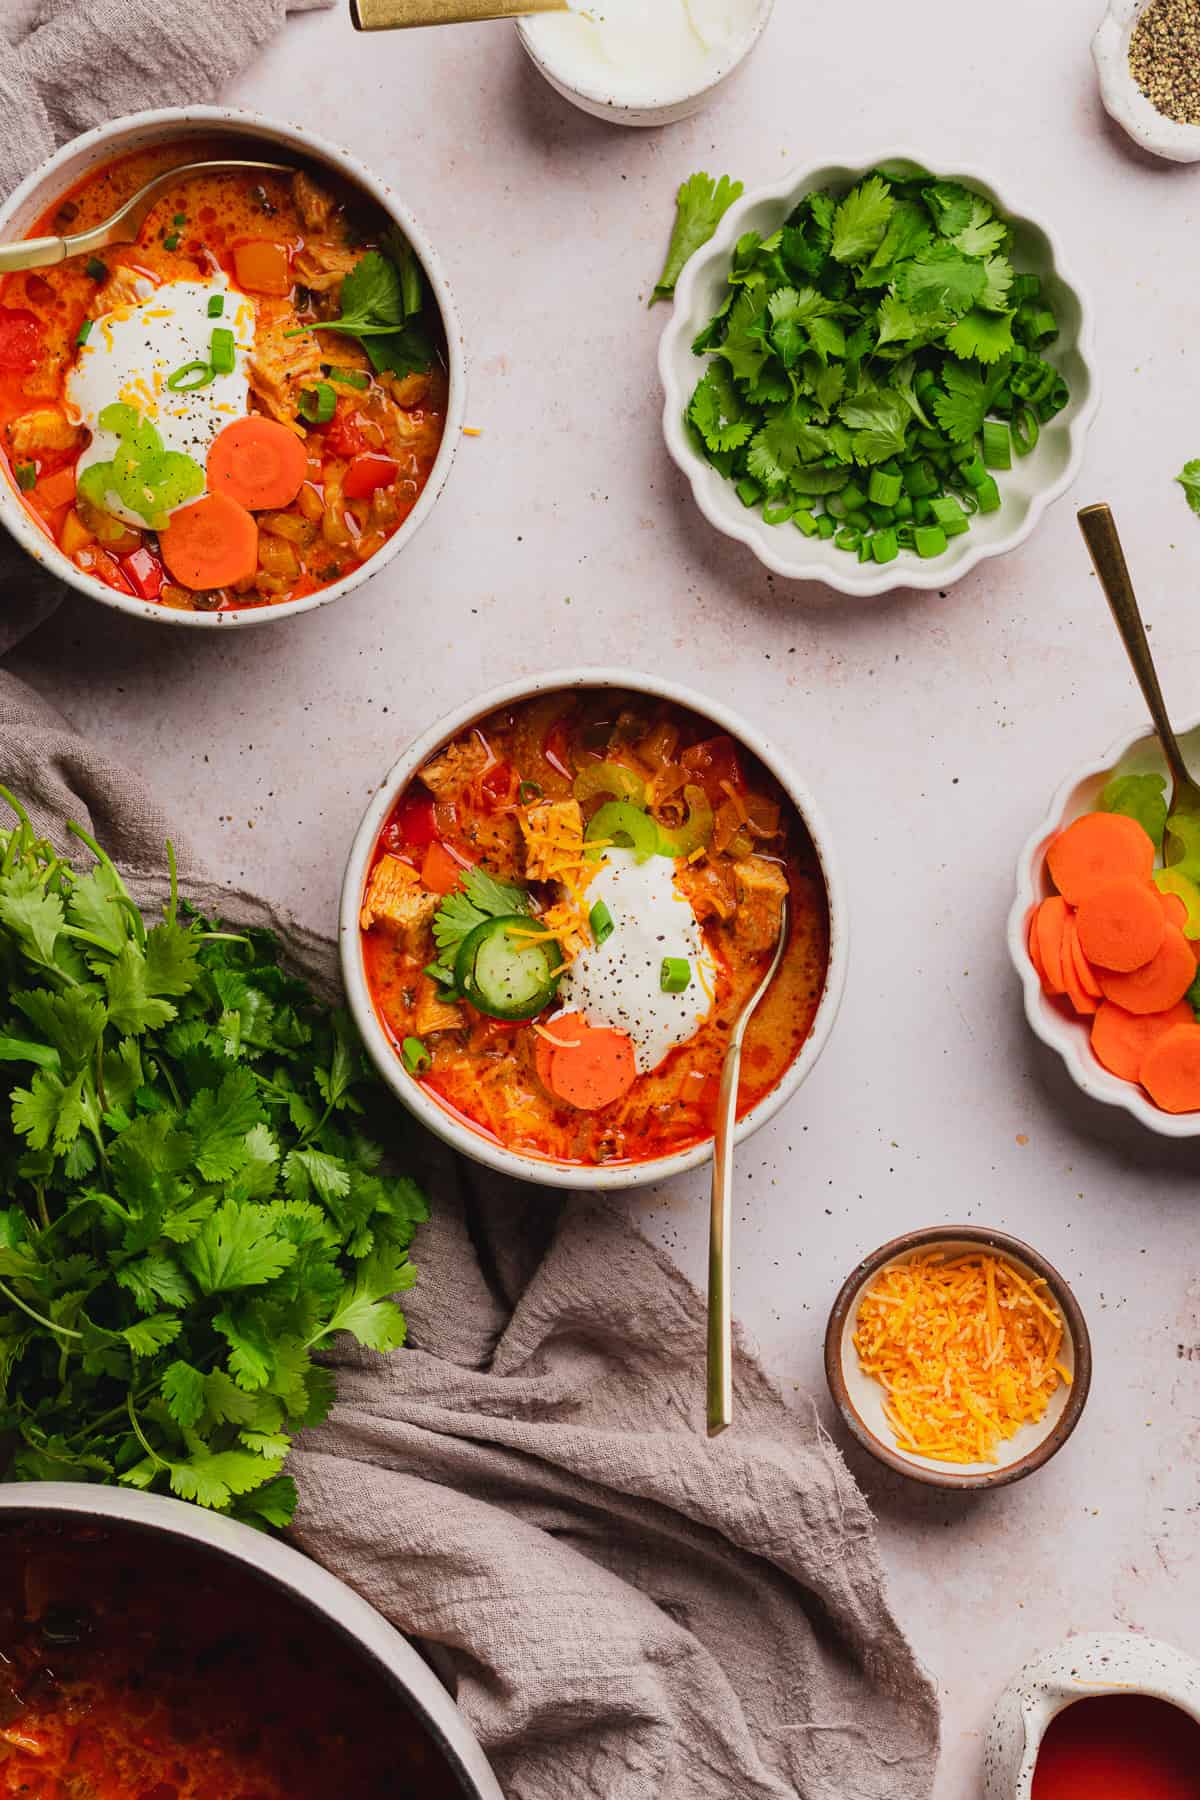 yummy bowls of buffalo chicken chili with lots of fresh veggies for toppings, sour cream, and cheese